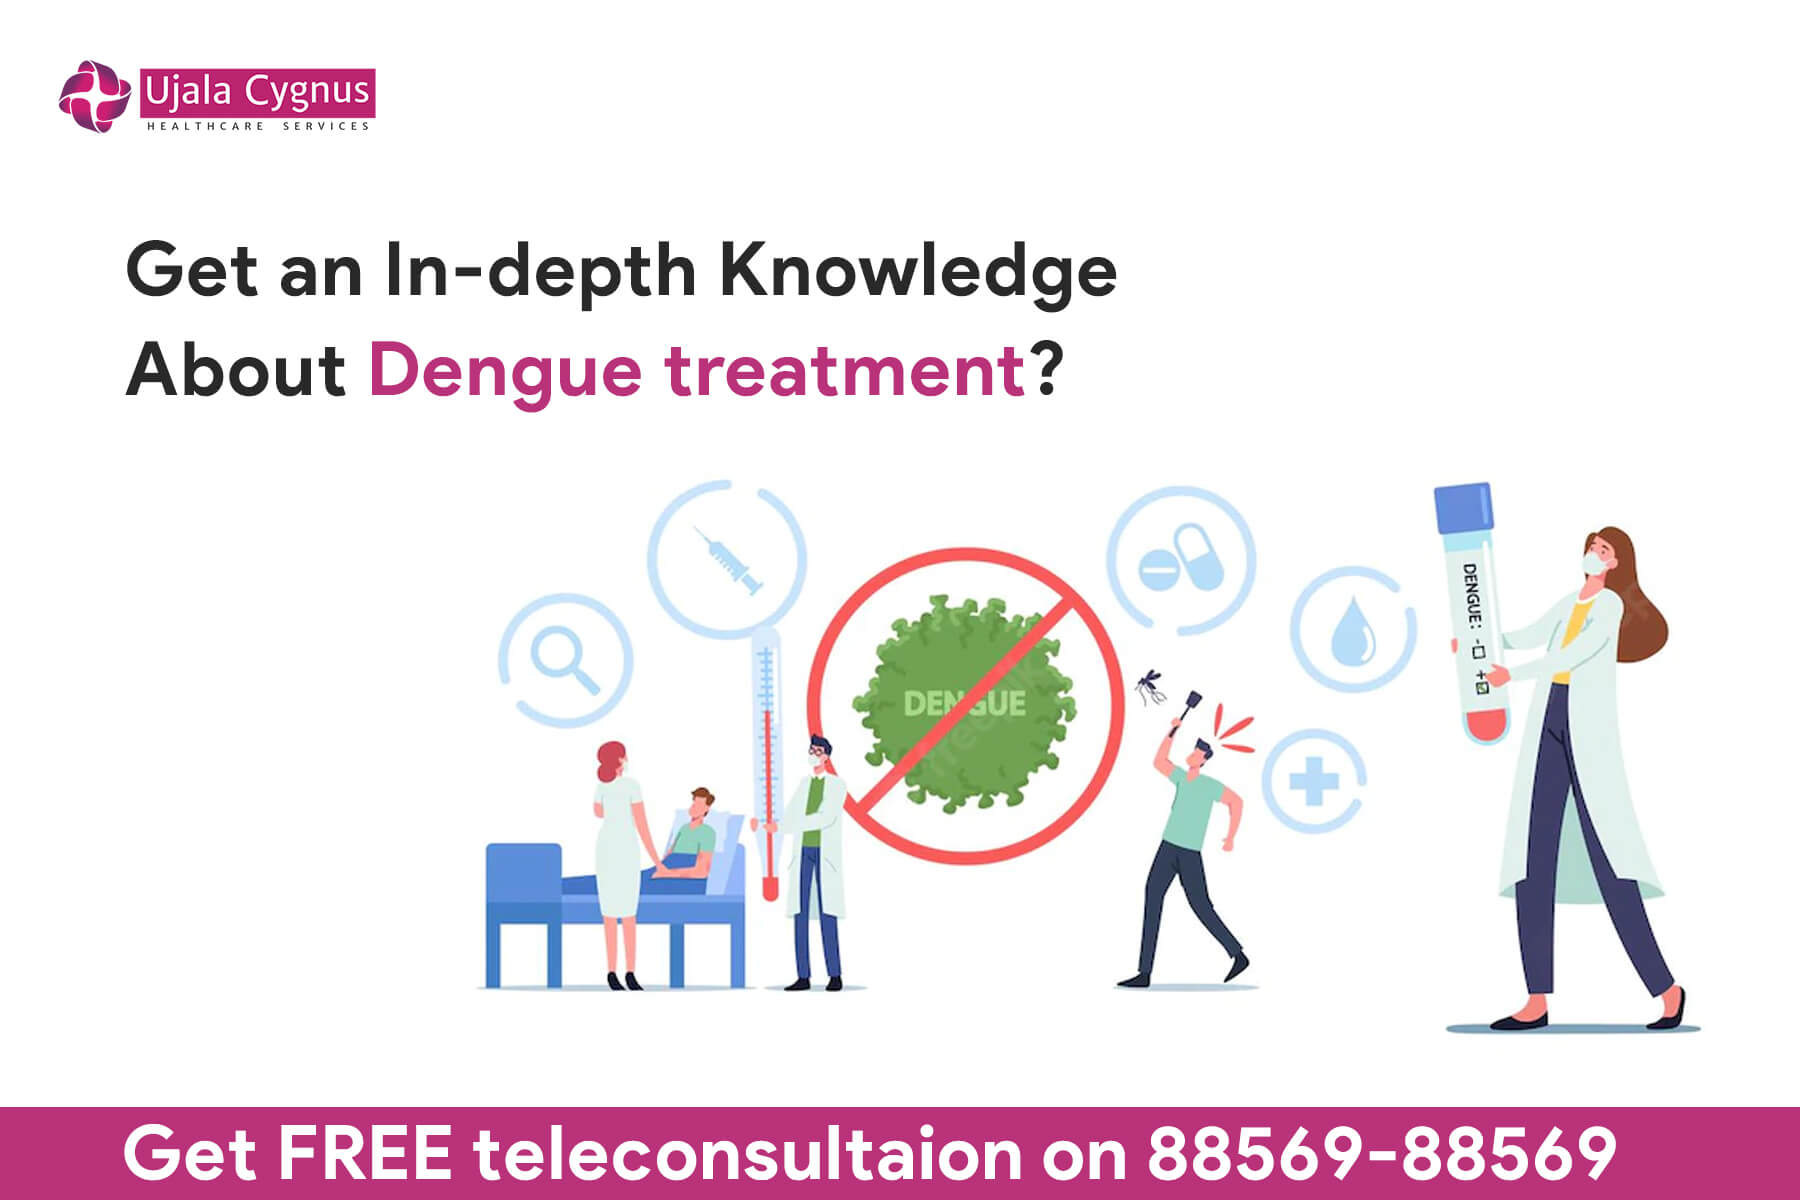 Get an In-depth Knowledge About Dengue treatment